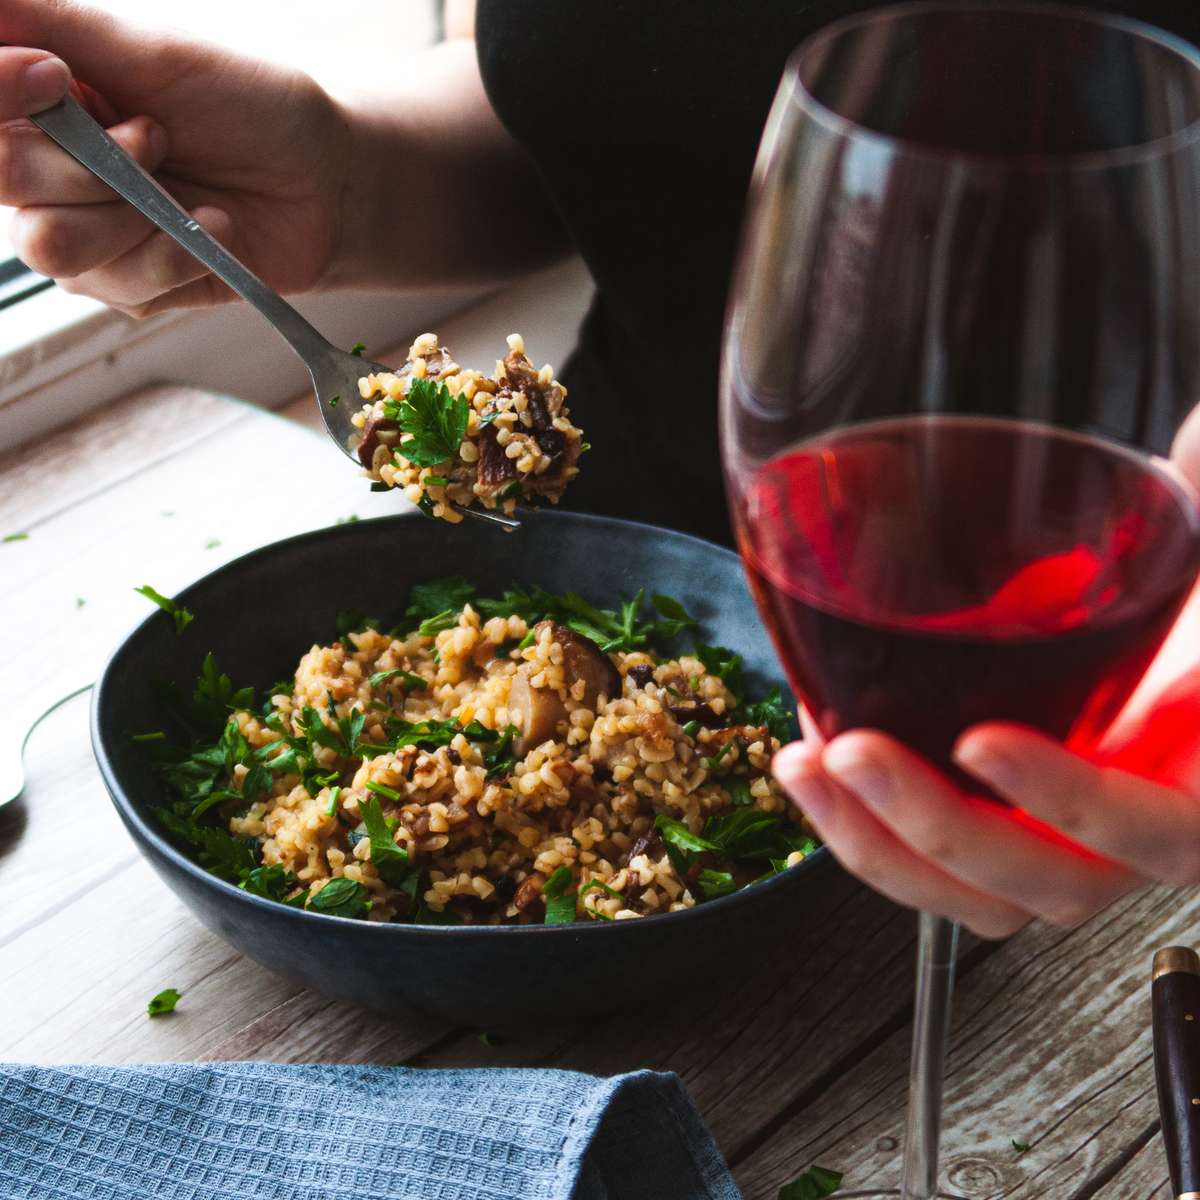 red wine and healthy dish